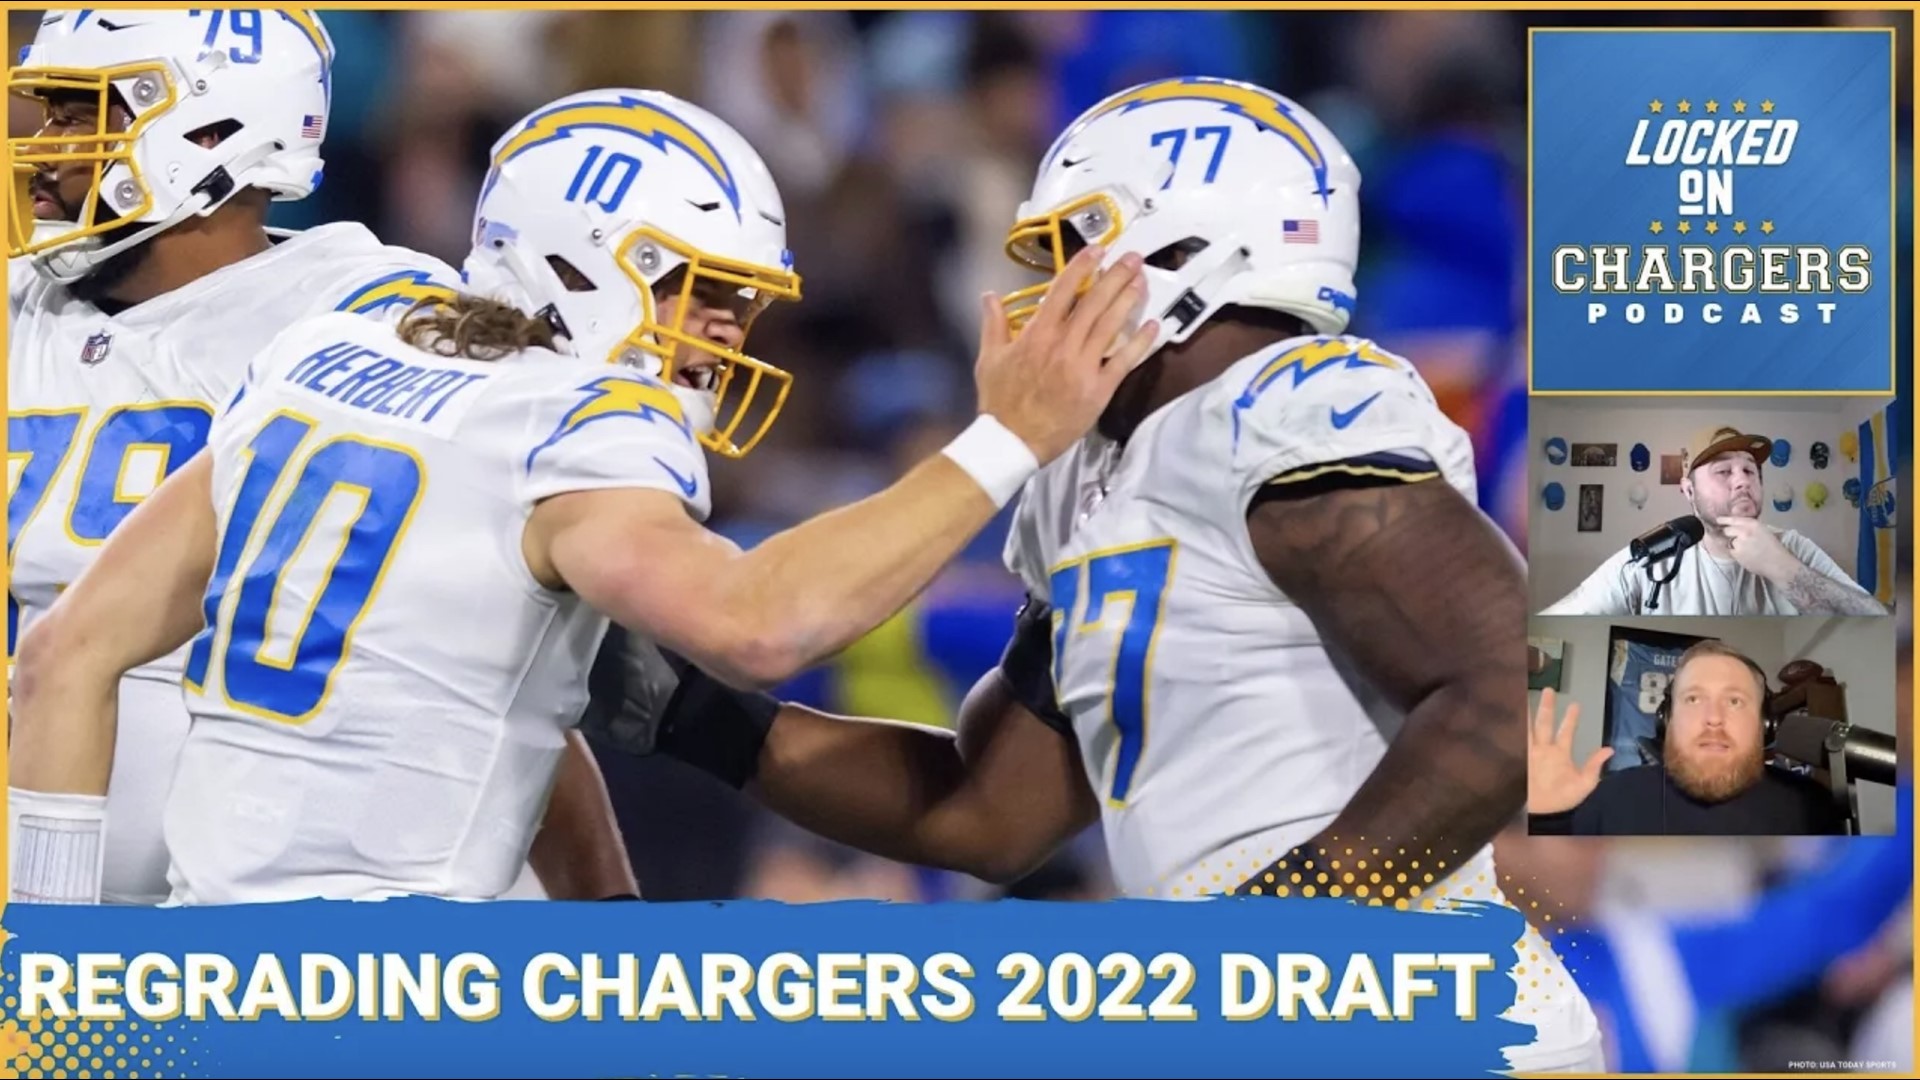 The Chargers got major contributions from many of their rookies in 2022, and some of their selections look like absolute steals.